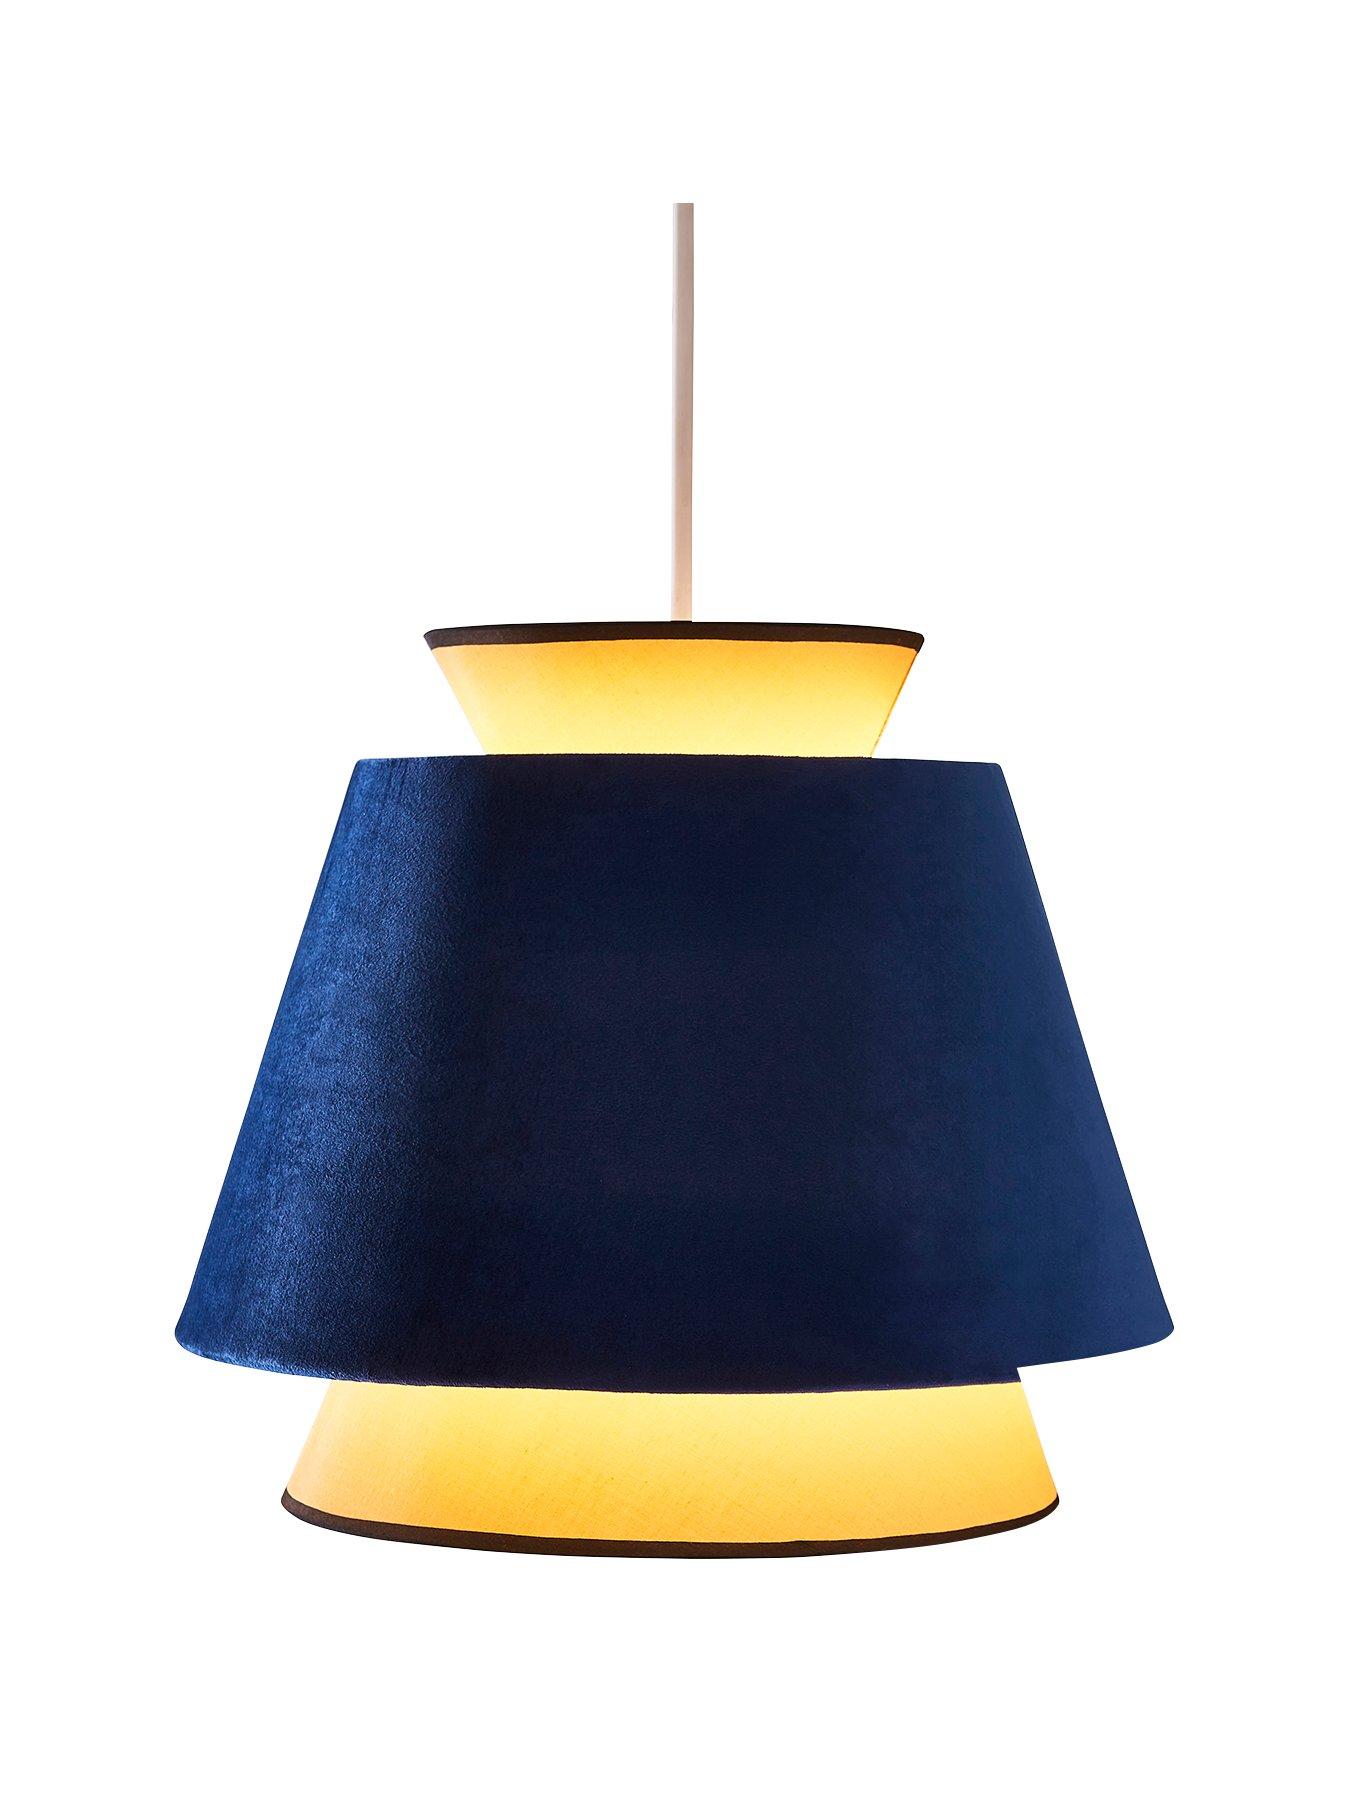 Jute String Empire Lamp Shade - Available in Three Sizes - Lux Lamp Shades